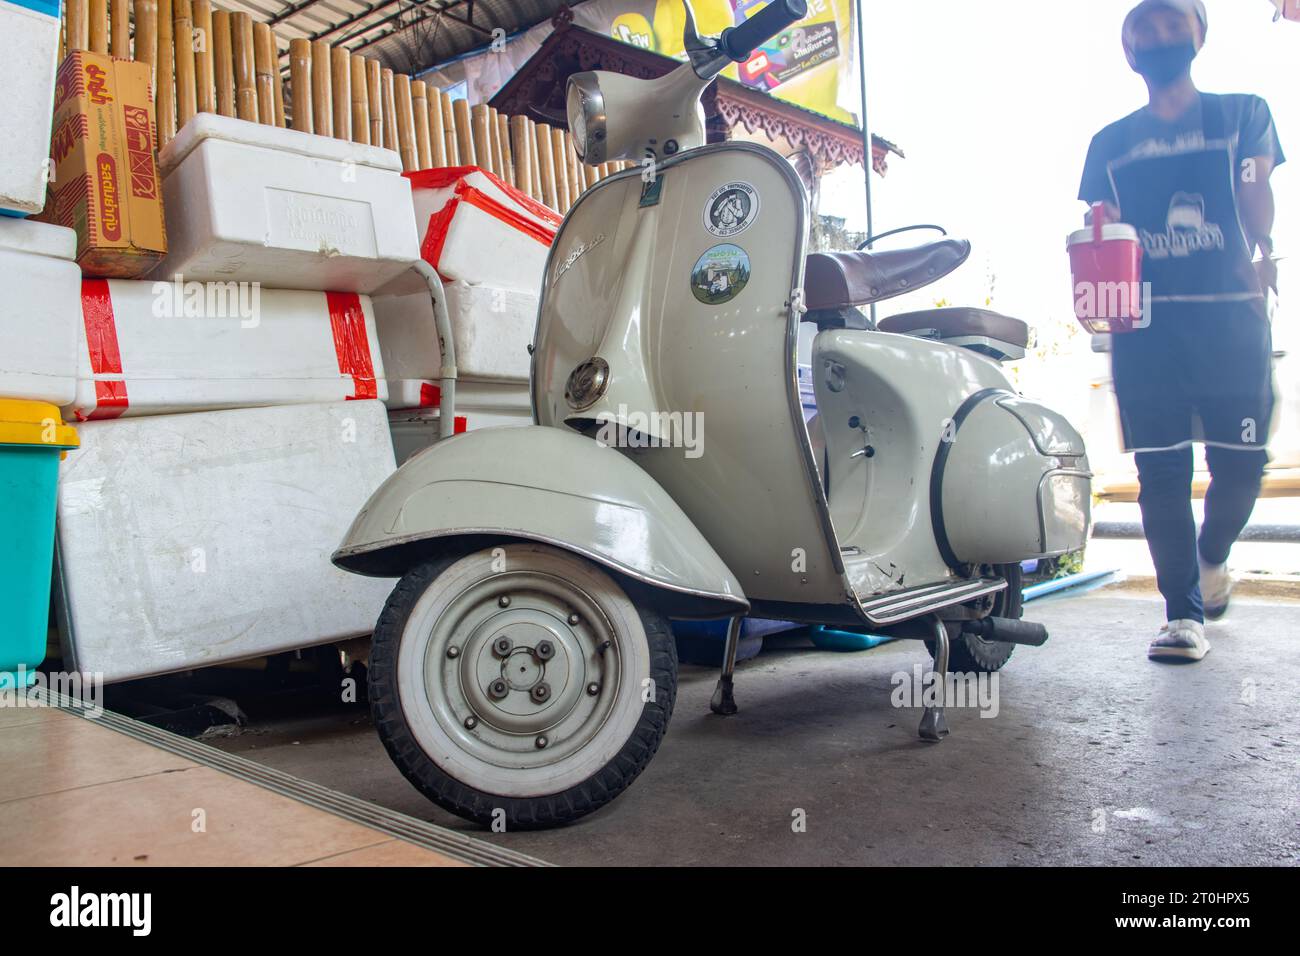 NAN, THAILAND, MAY 19 2023, A Vespa motorcycle is parked in front of the restaurant Stock Photo